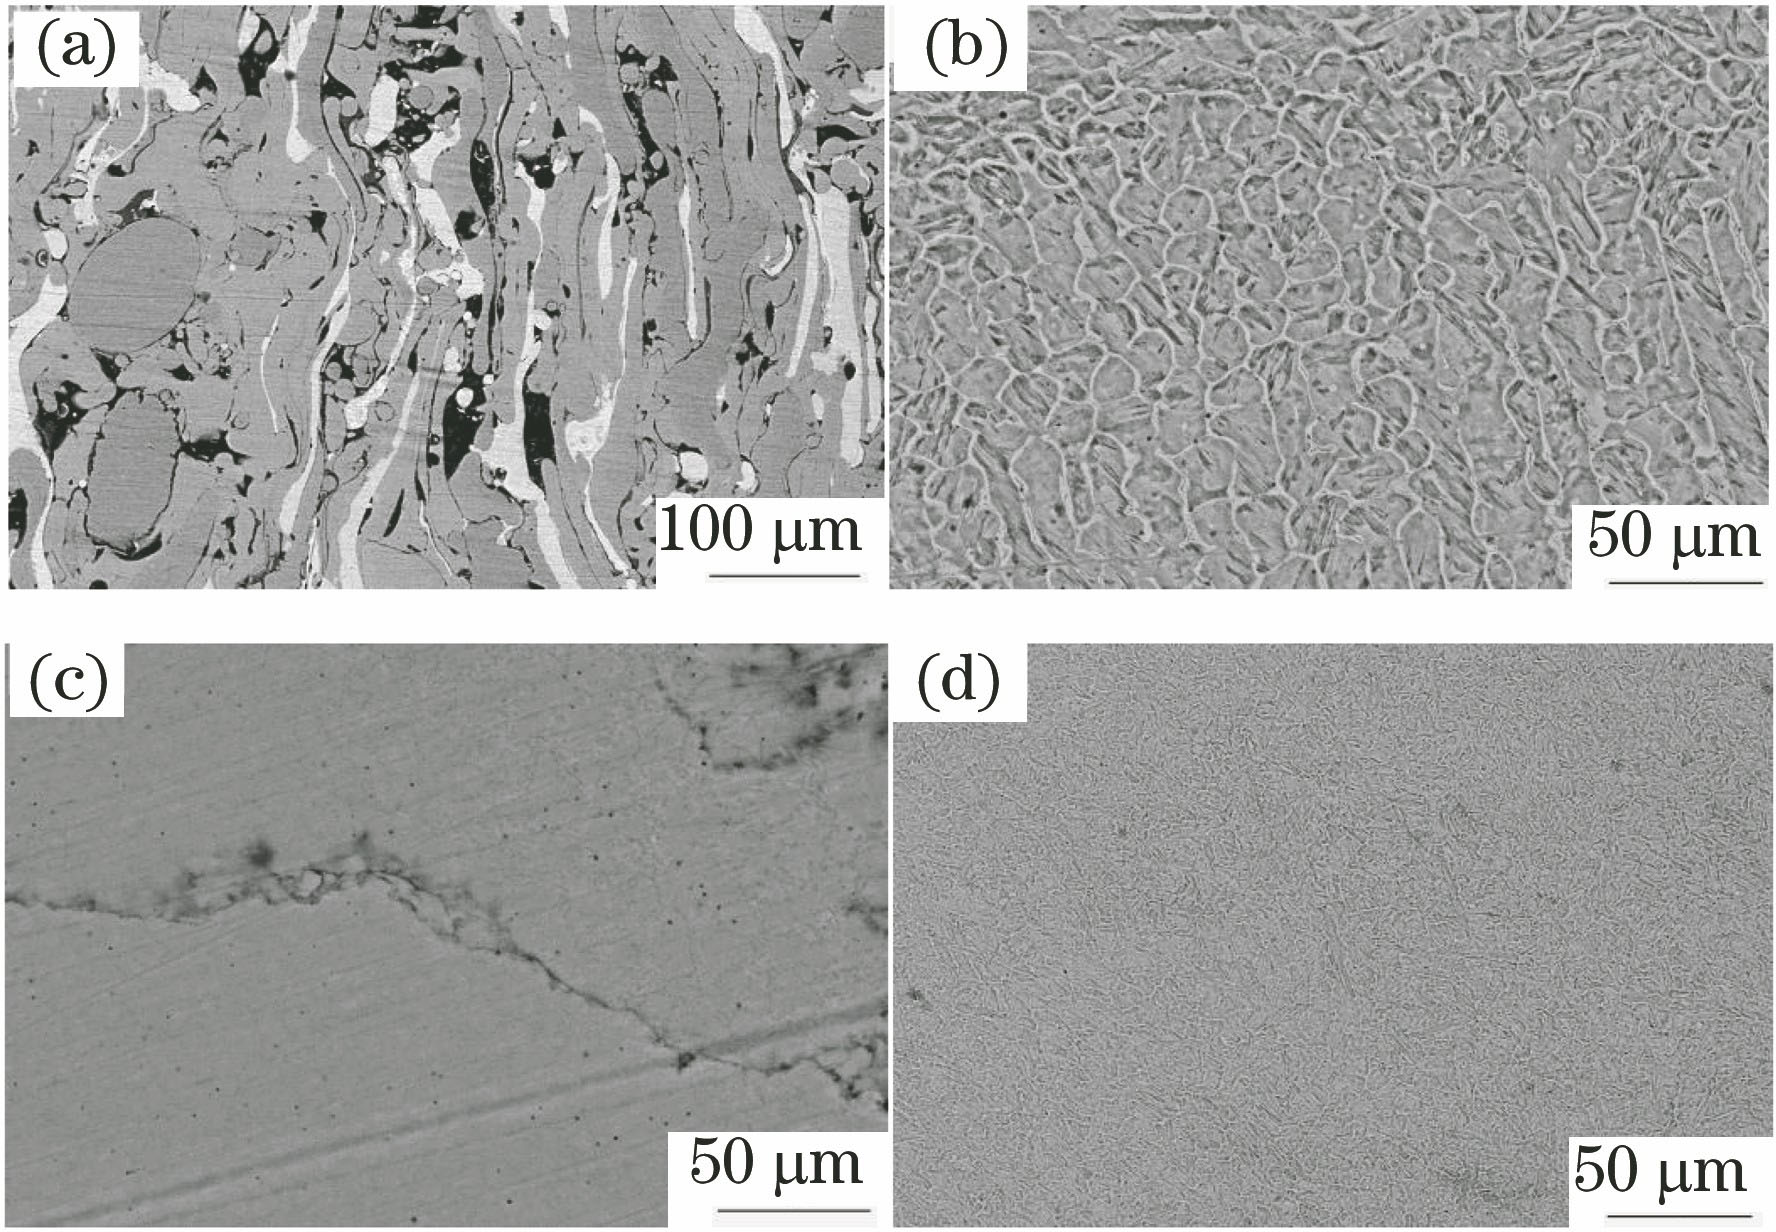 Micro-morphologies of remelted layers under different laser remelting trajectories. (a) Dotted; (b) rectangular; (c) parallel; (d) circular